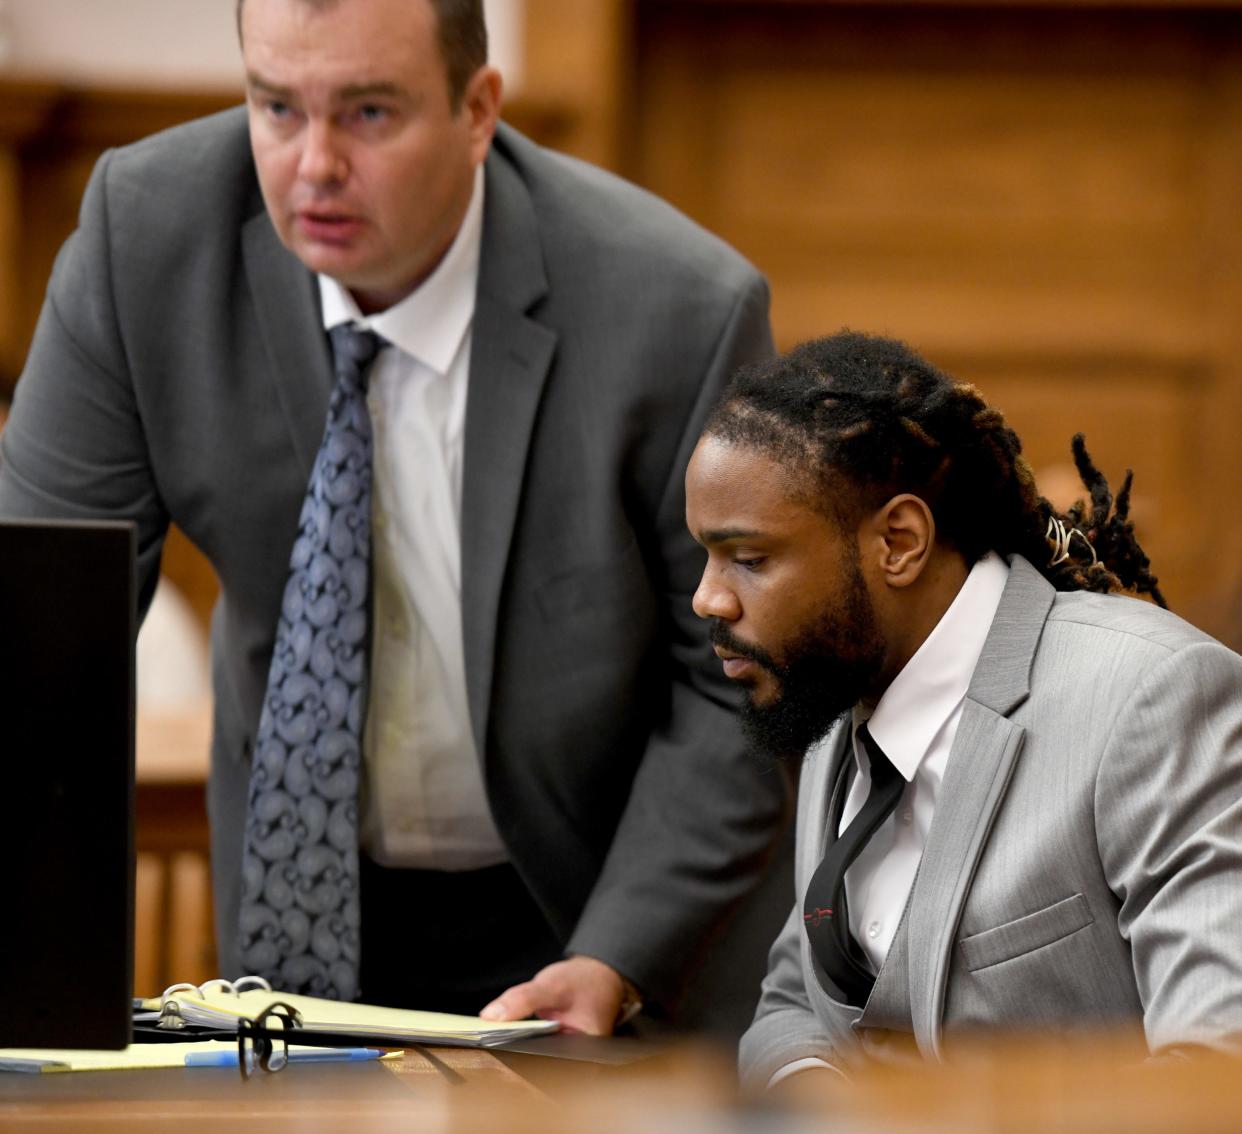 Errol G. Frank III, right, speaks Tuesday with defense attorney Aaron Kovalchik while on trial in Stark County Common Pleas Court. He faces felony charges of murder, felonious assault and tampering with evidence with gun specifications in the death of Melvin Stevenson in March.